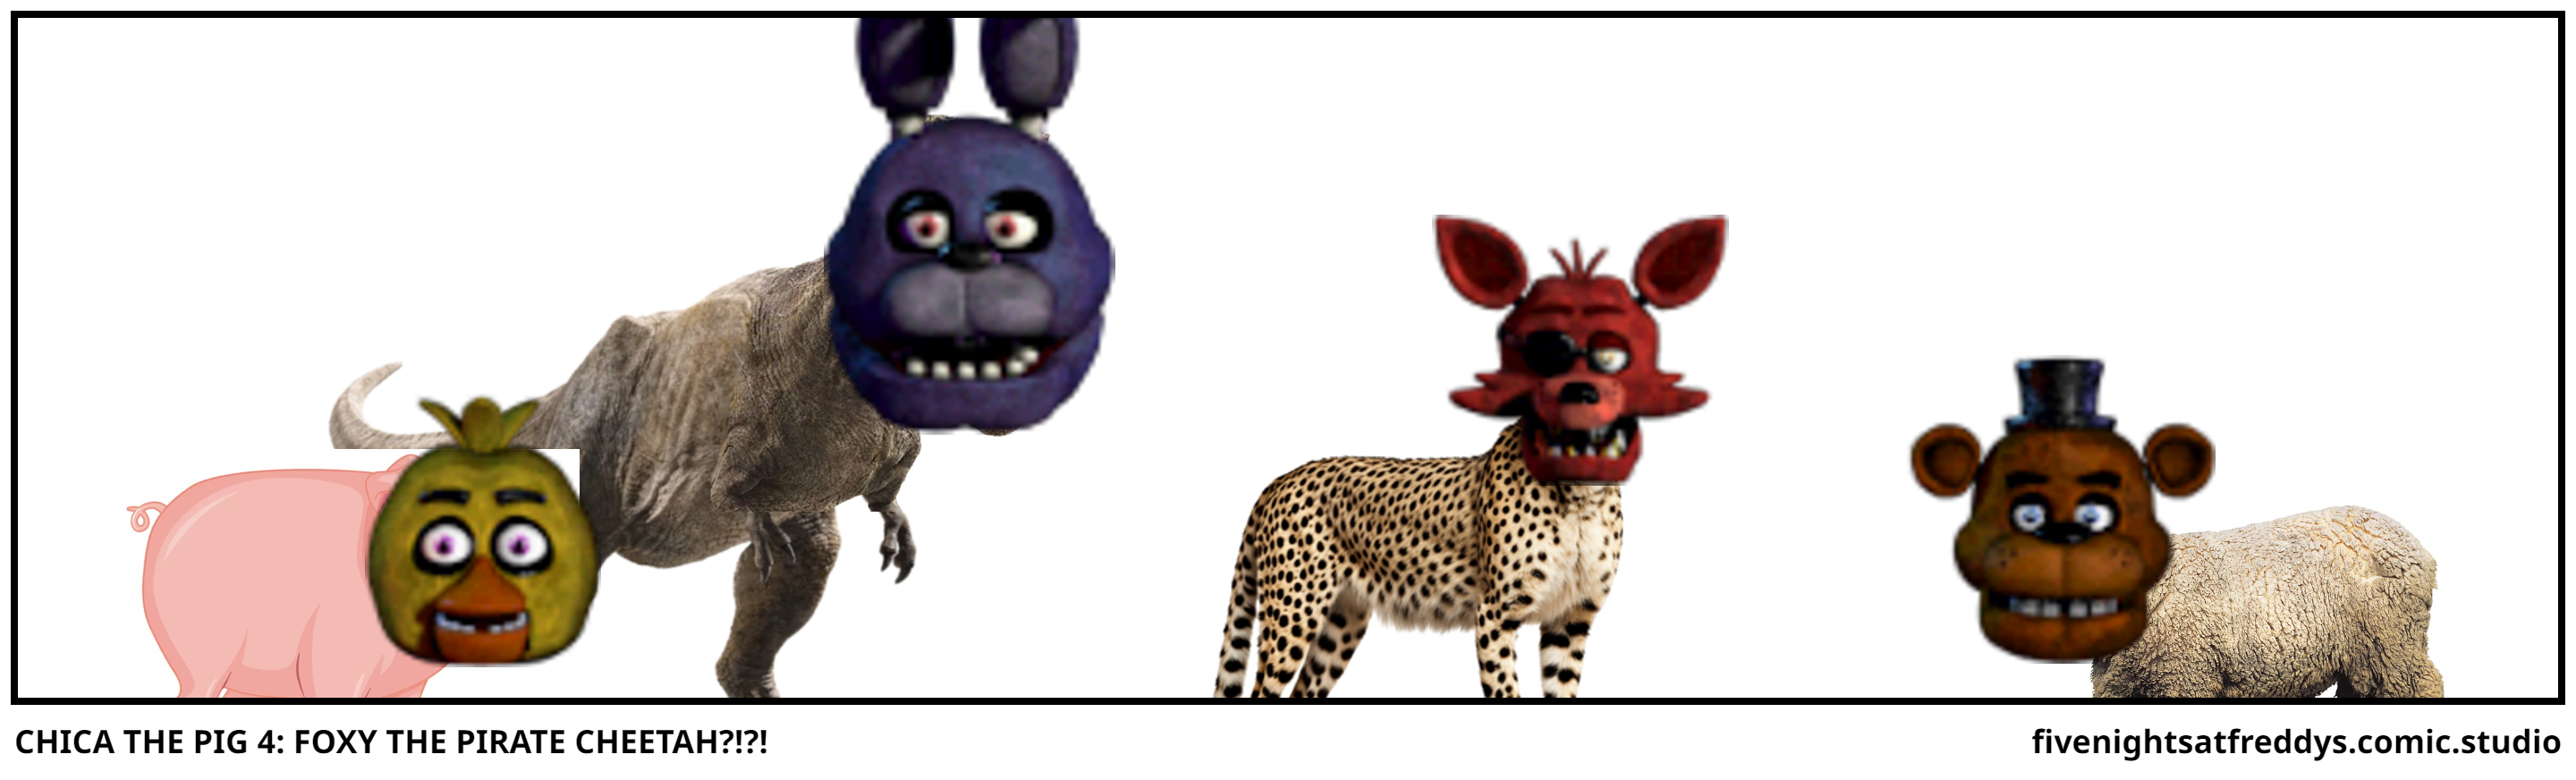 CHICA THE PIG 4: FOXY THE PIRATE CHEETAH?!?!